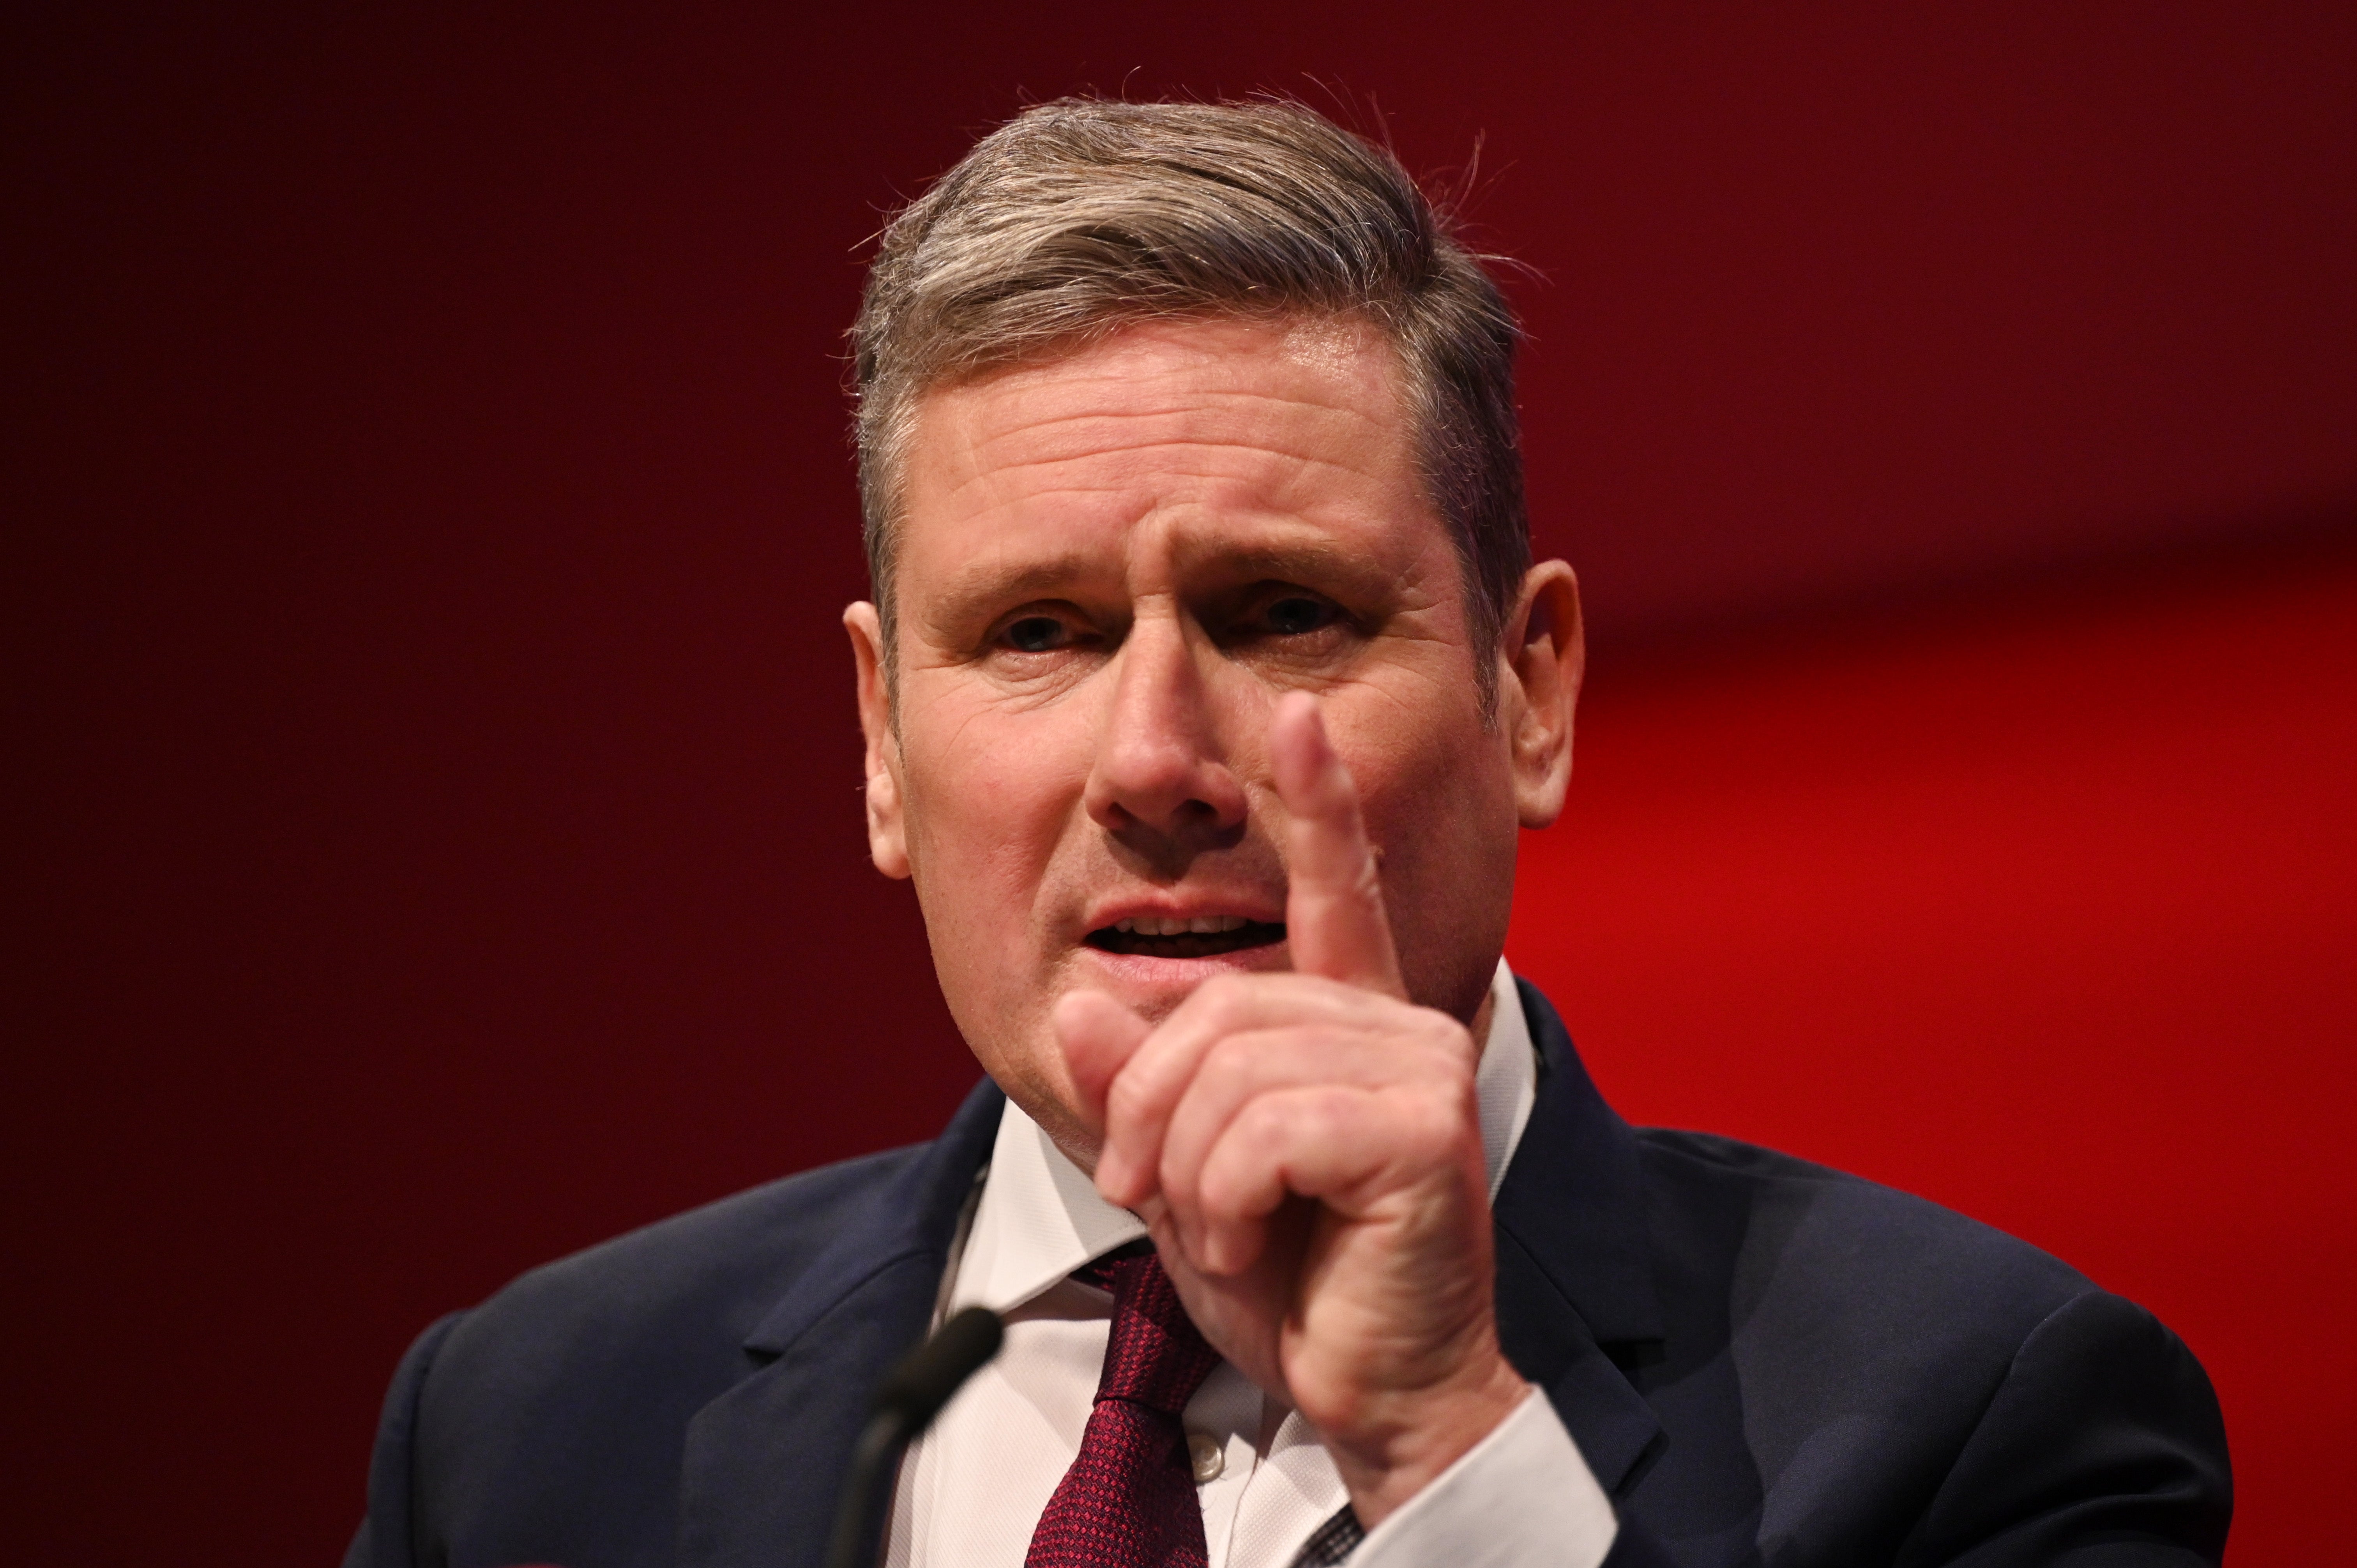 Keir Starmer delivers his keynote speech to Labour conference